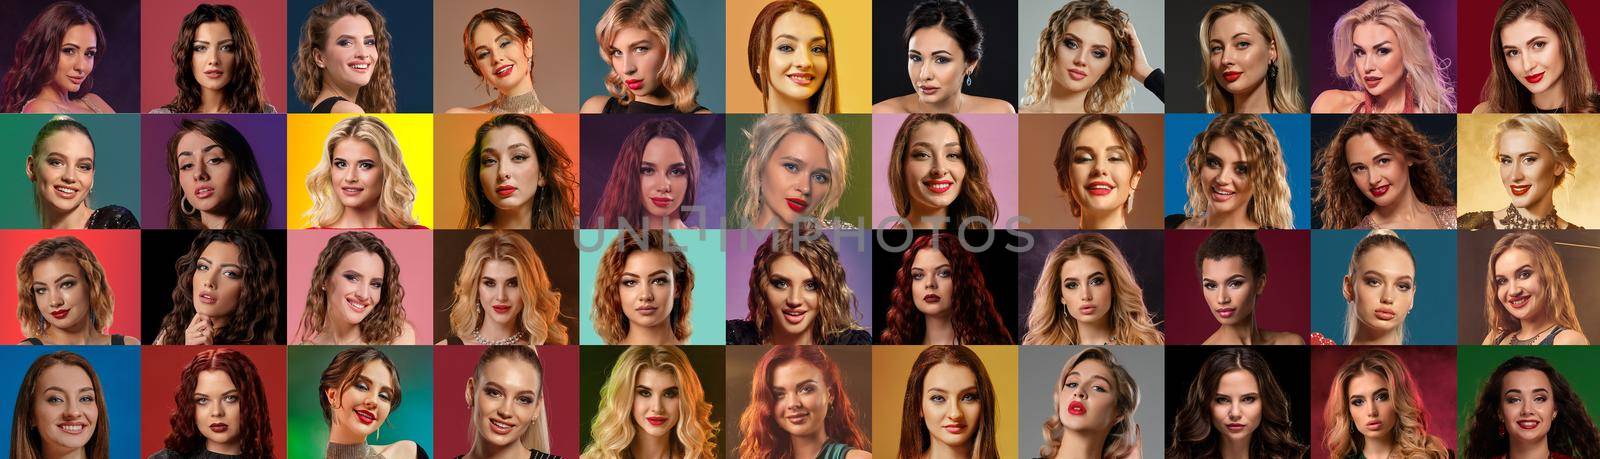 Collage of women and men faces expressing different facial emotions, smiling, unsmiling. Posing against colorful studio backgrounds